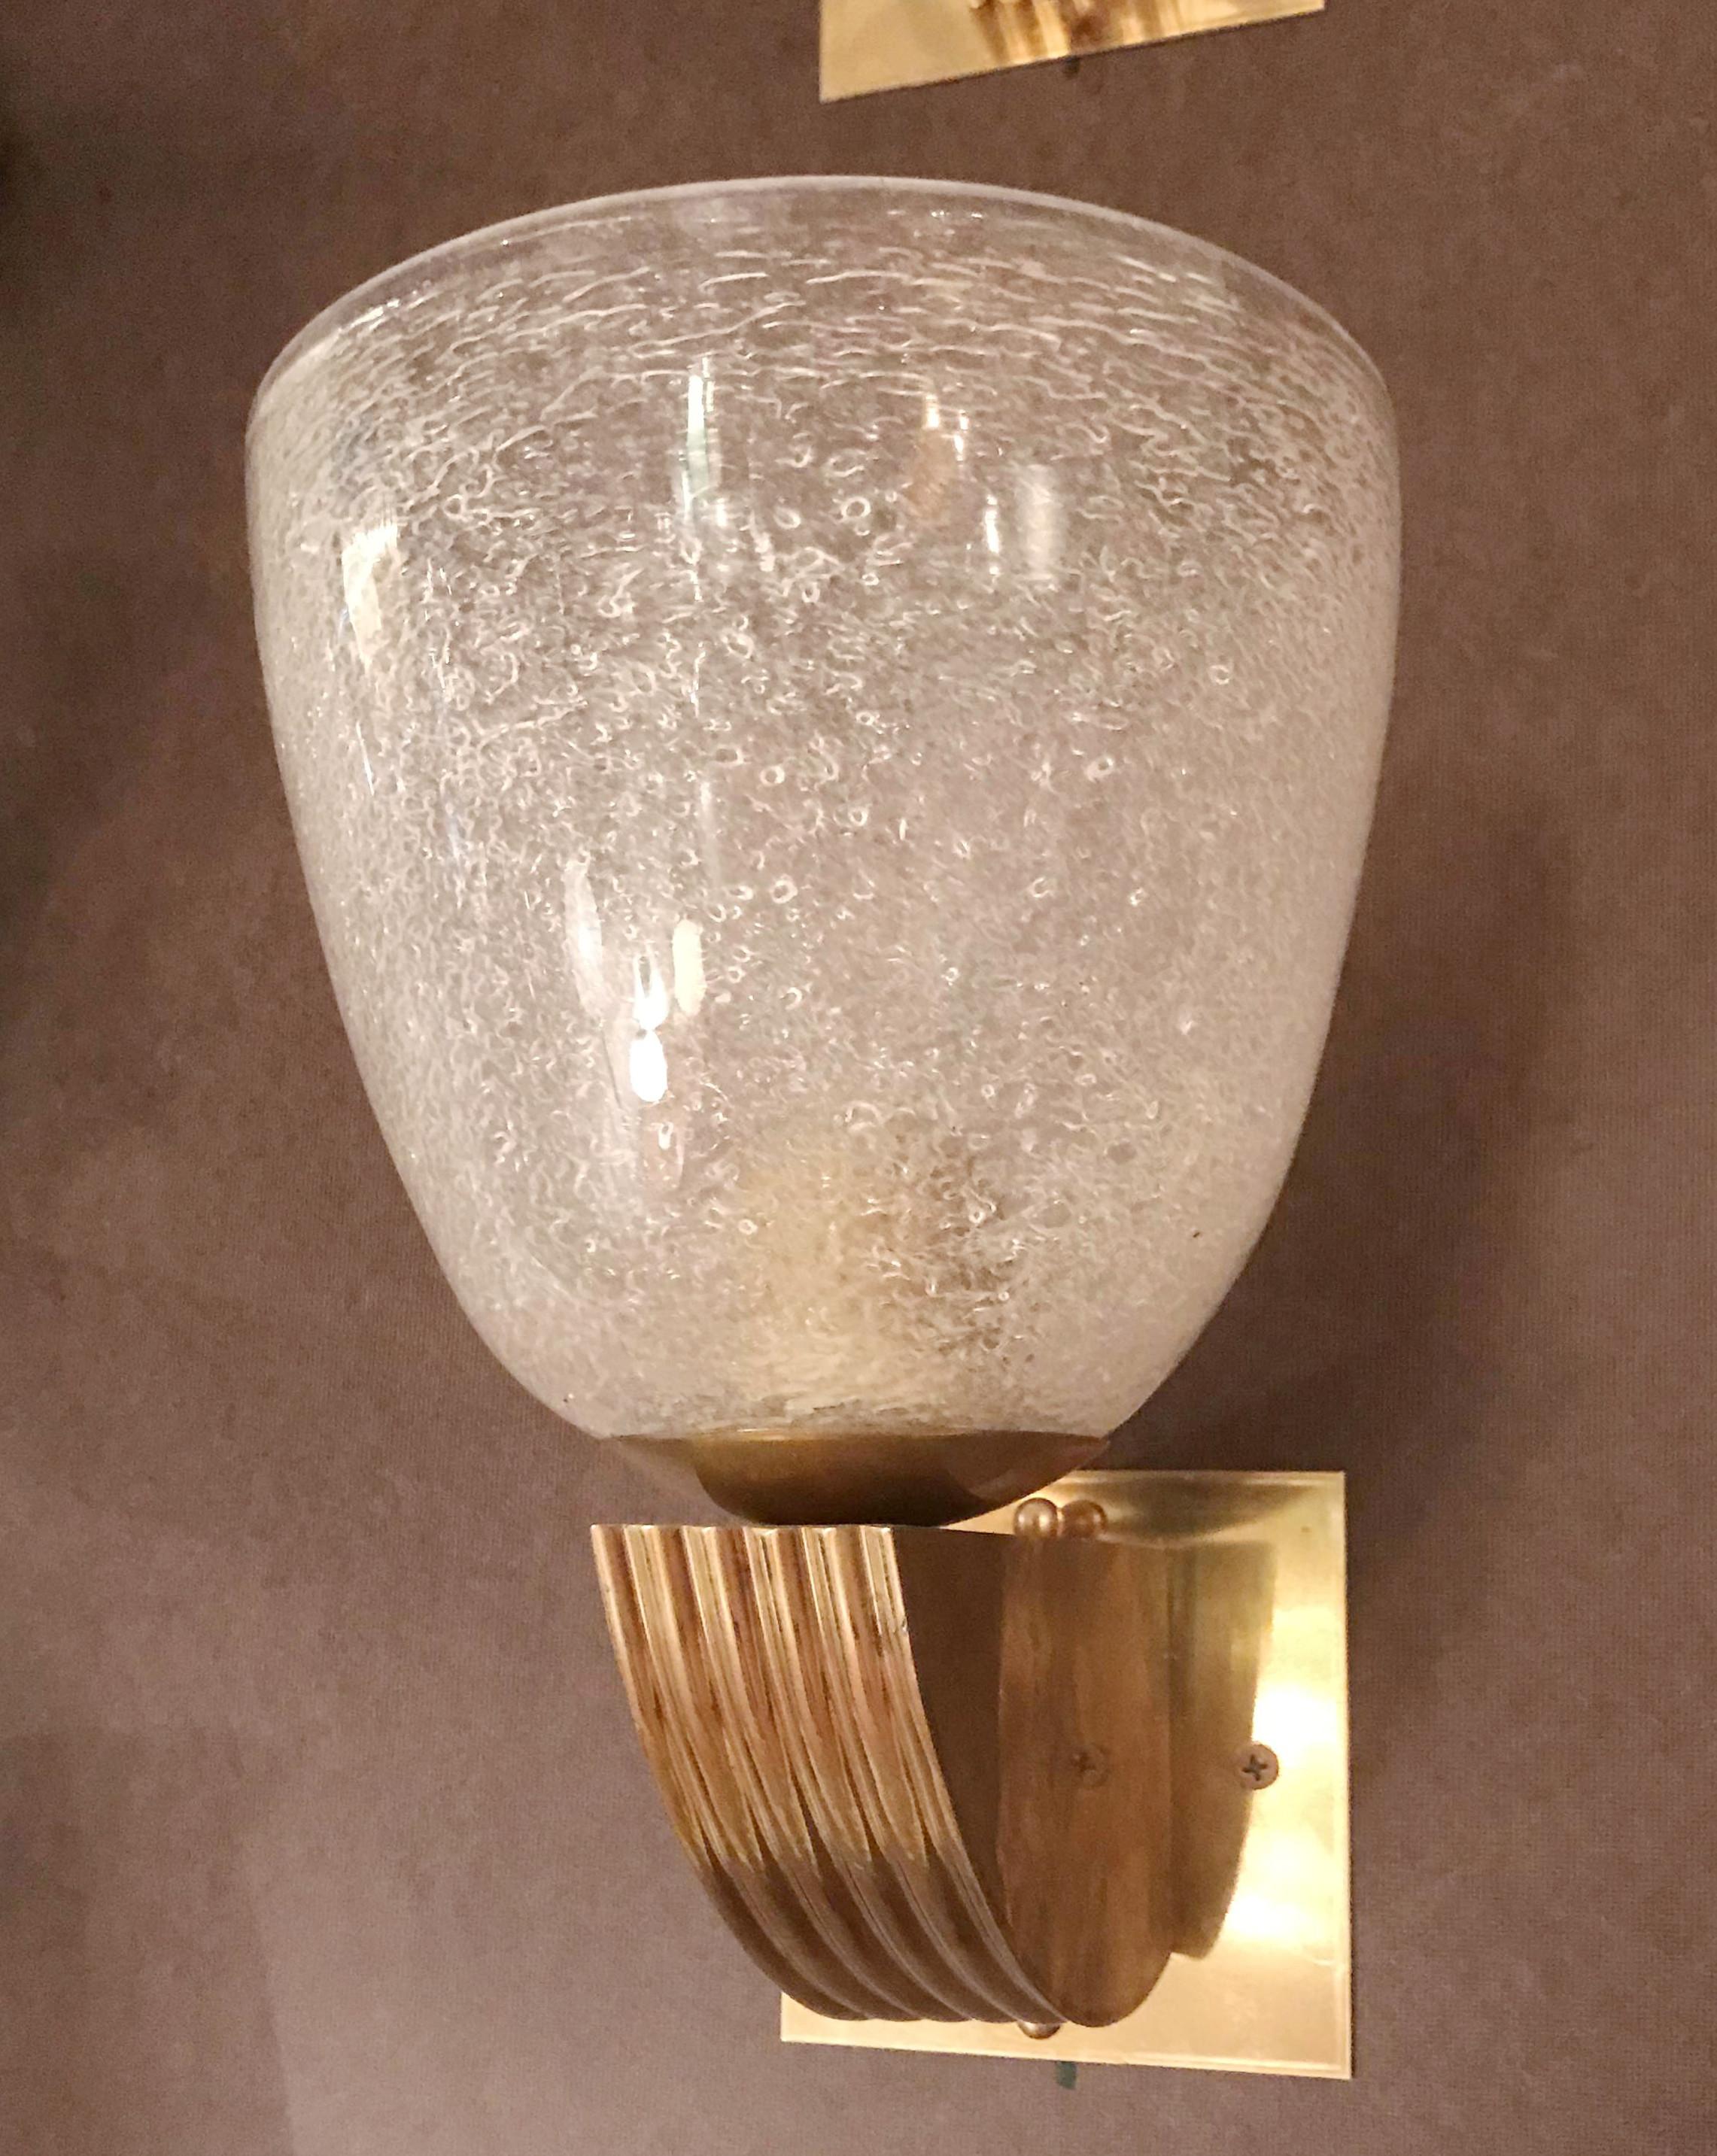 Limited edition Italian wall light with clear textured Murano glass on brass frame
Single light / max 60W 
One in stock in Palm Springs
        